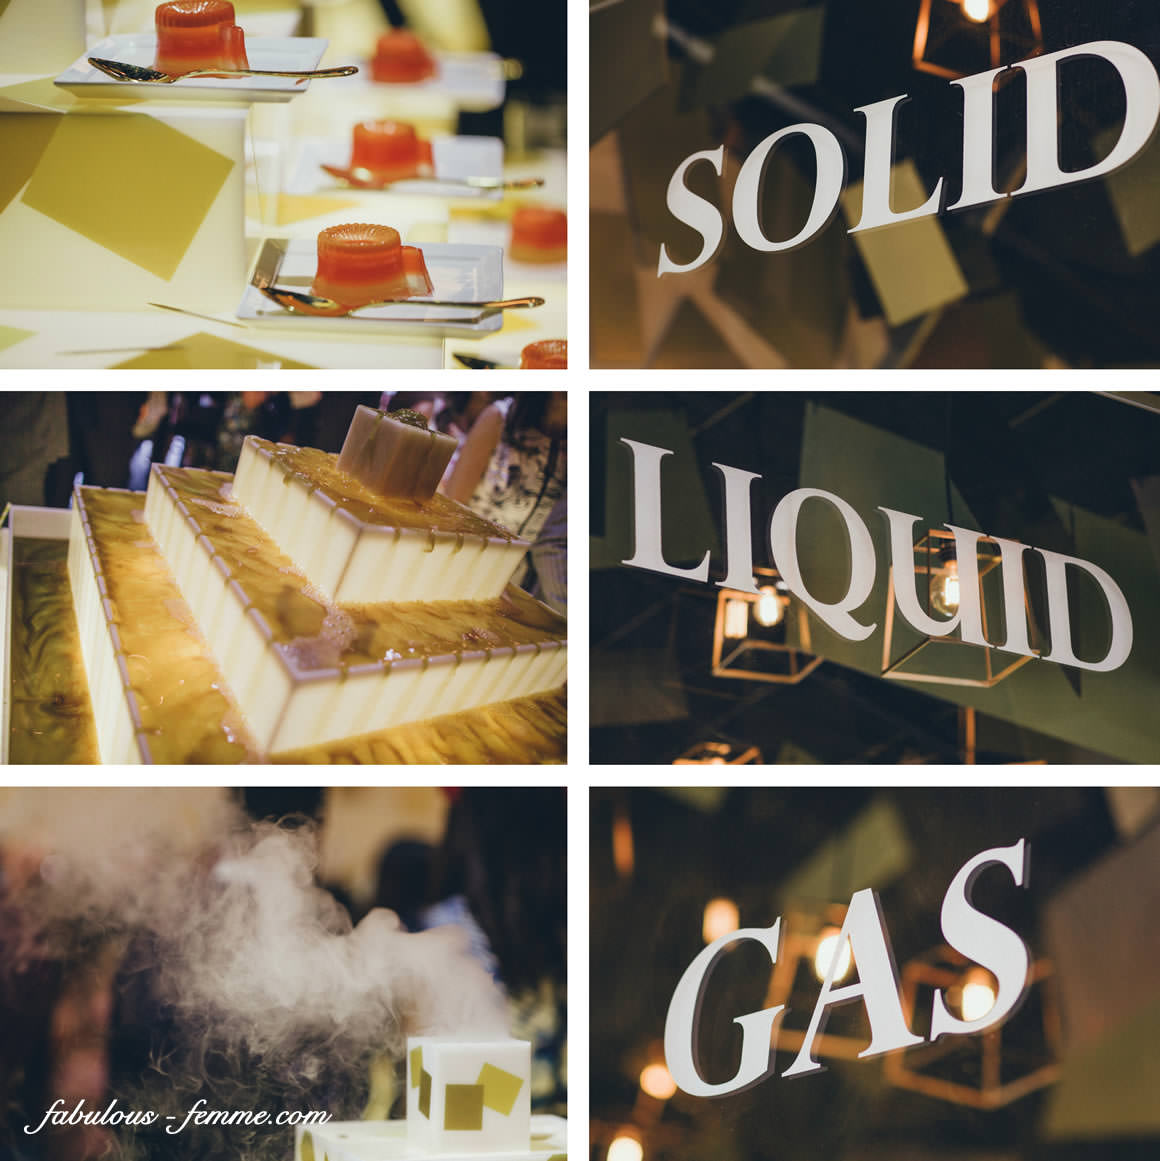 serving of liquid, gas and solid treats 